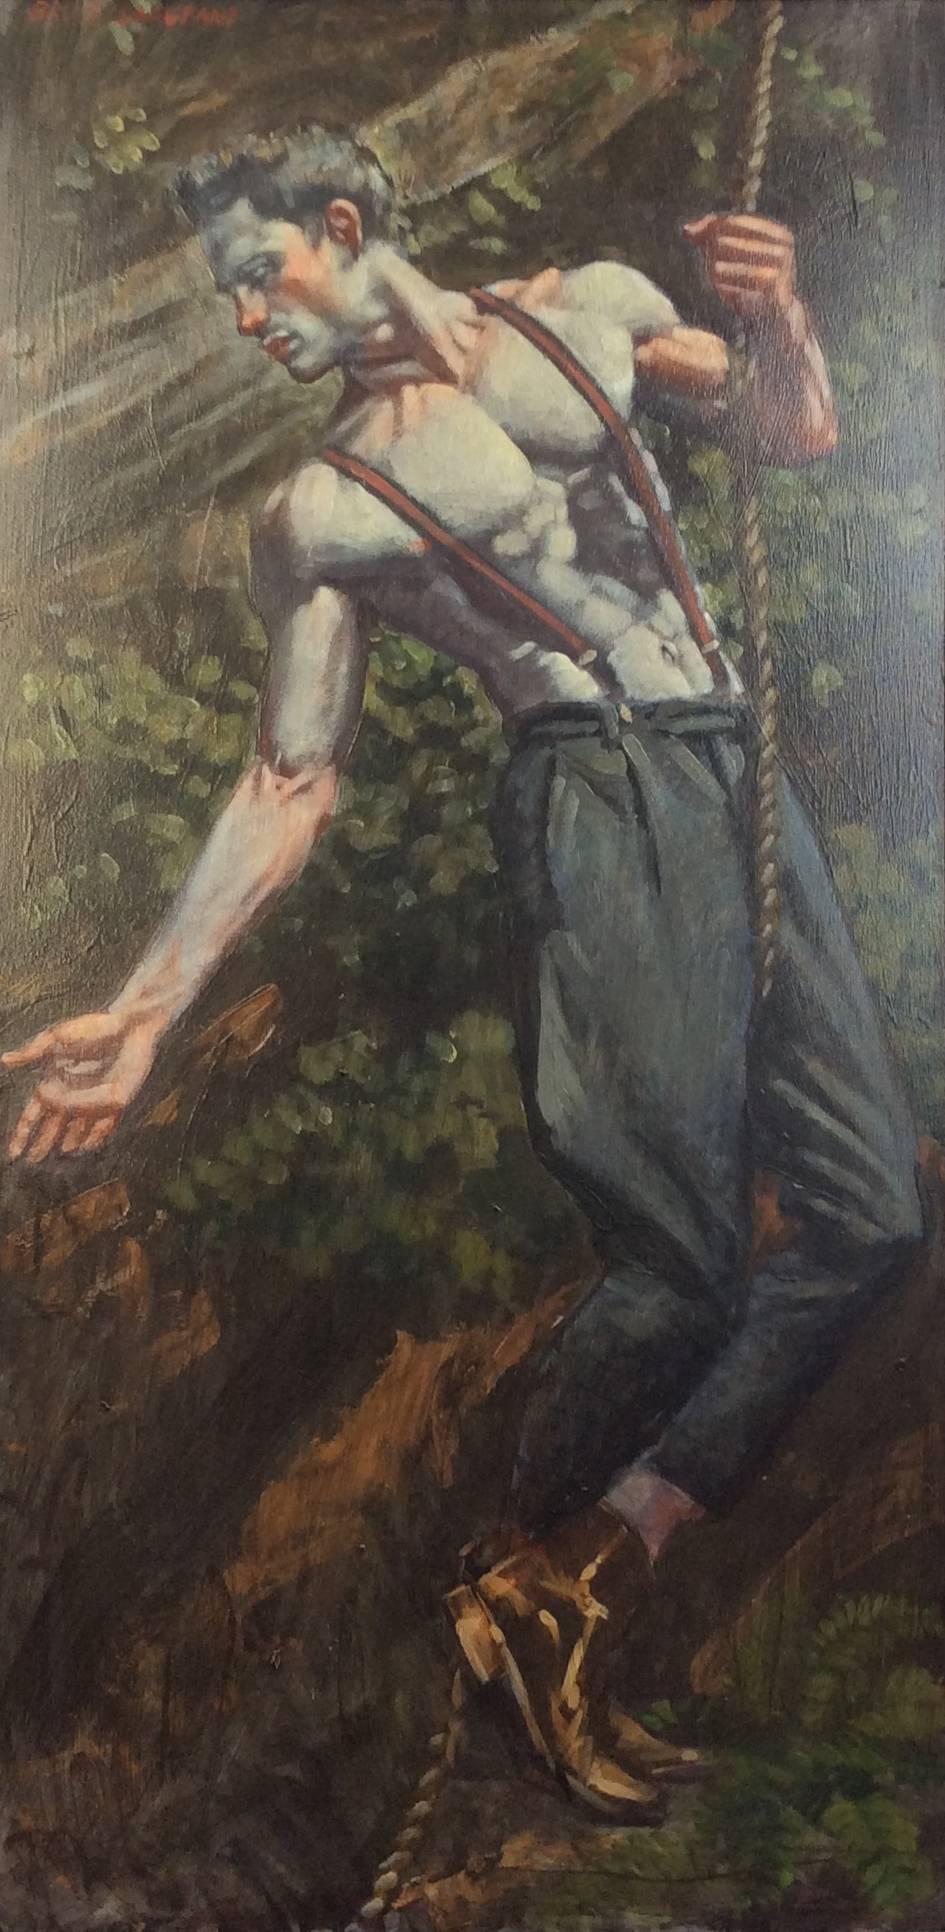 Climber (Portrait of a Male in Suspenders & Boots holding a rope in a Landscape) - Painting by Mark Beard